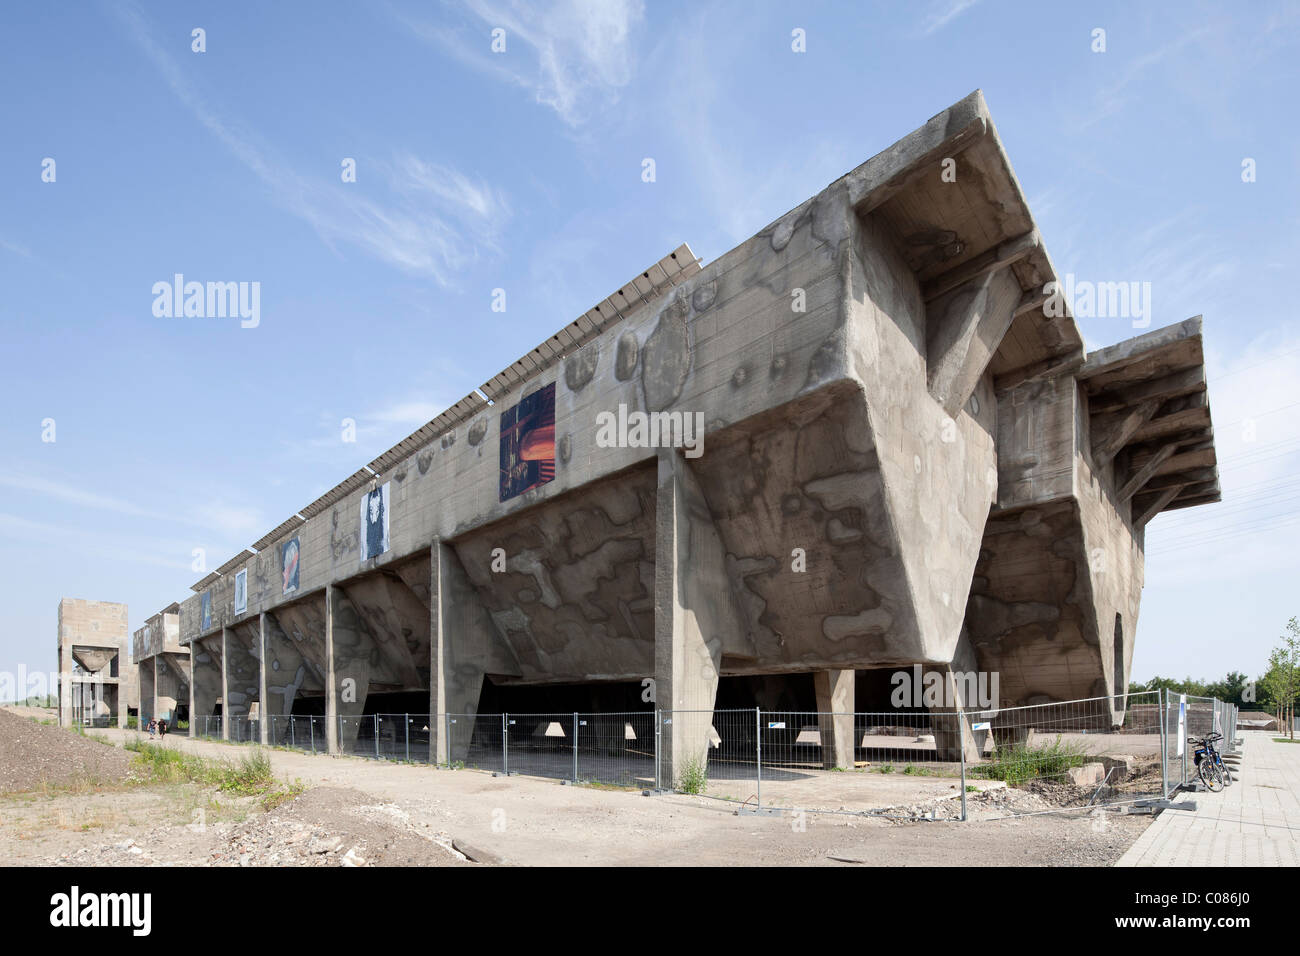 Ore and coal bunkers of the former Schalker Verein steelworks, art action Starke Orte, Strong Places Stock Photo